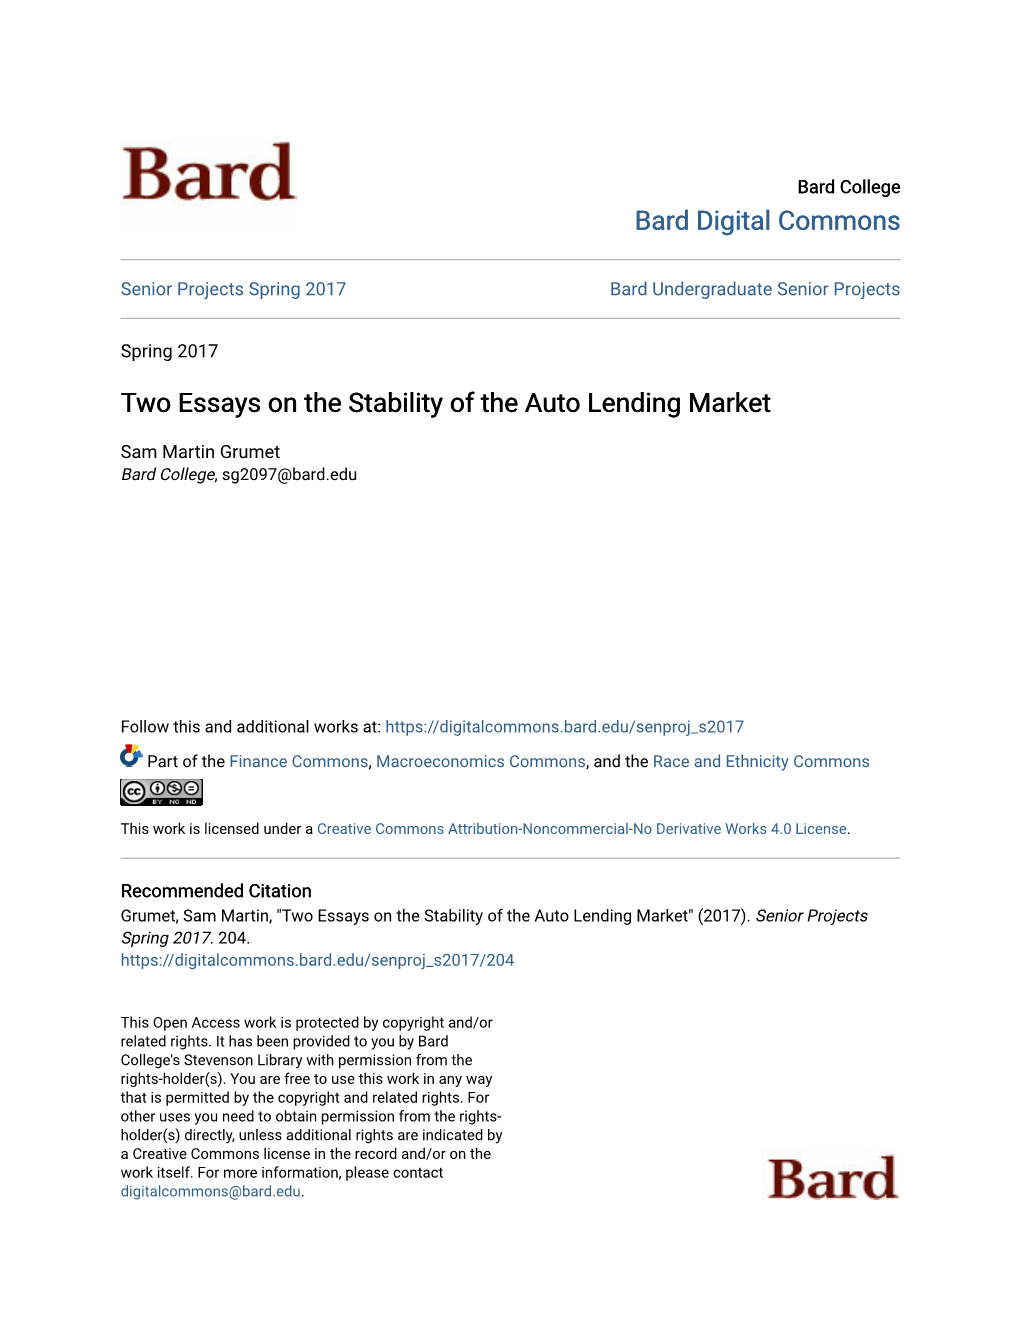 Two Essays on the Stability of the Auto Lending Market